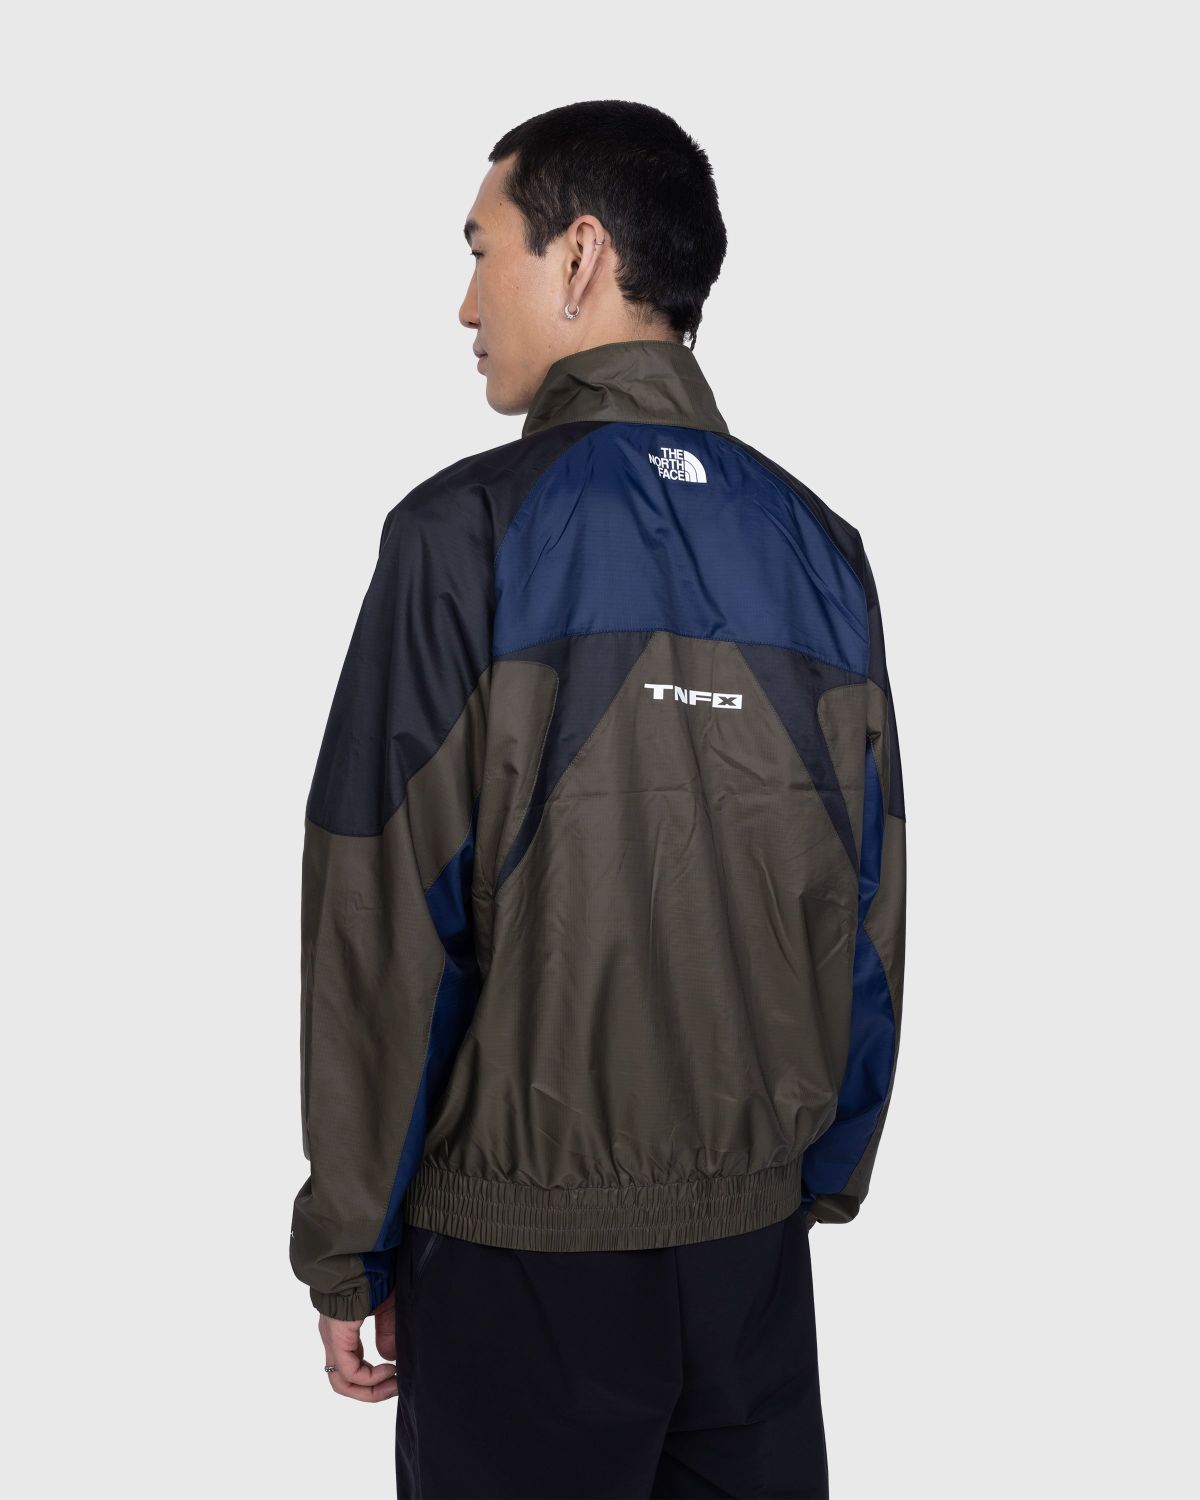 The North Face – TNF X Jacket Green - Outerwear - Blue - Image 3